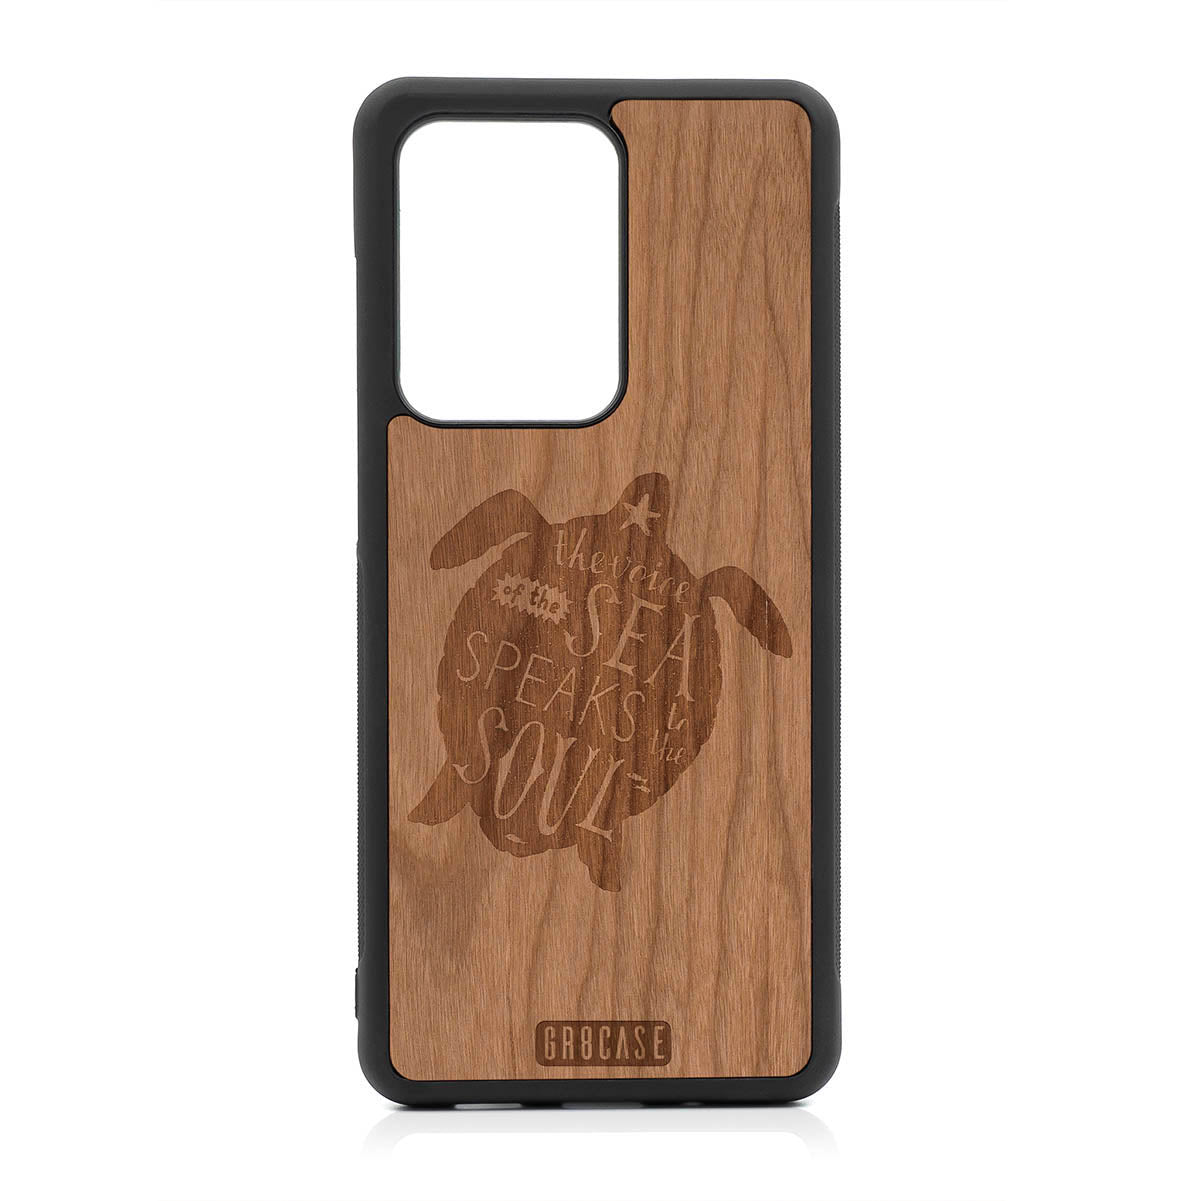 The Voice Of The Sea Speaks To The Soul (Turtle) Design Wood Case For Samsung Galaxy S20 Ultra